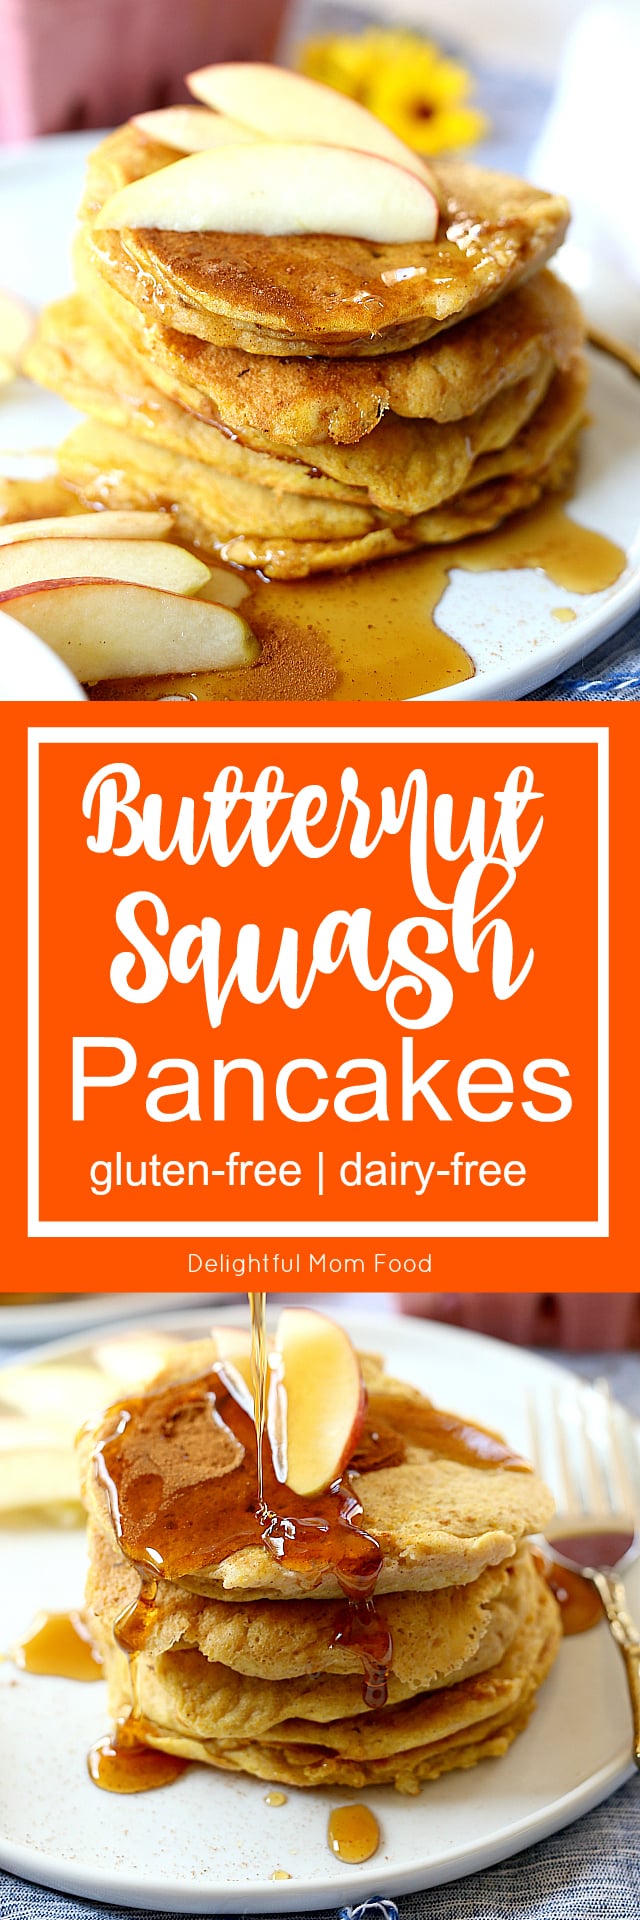 Butternut squash pancakes made with mashed butternut squash (Cucurbita moschata) blended with gluten free flours, egg and dairy-free milk! So easy and healthy for quick breakfast or healthy snack!